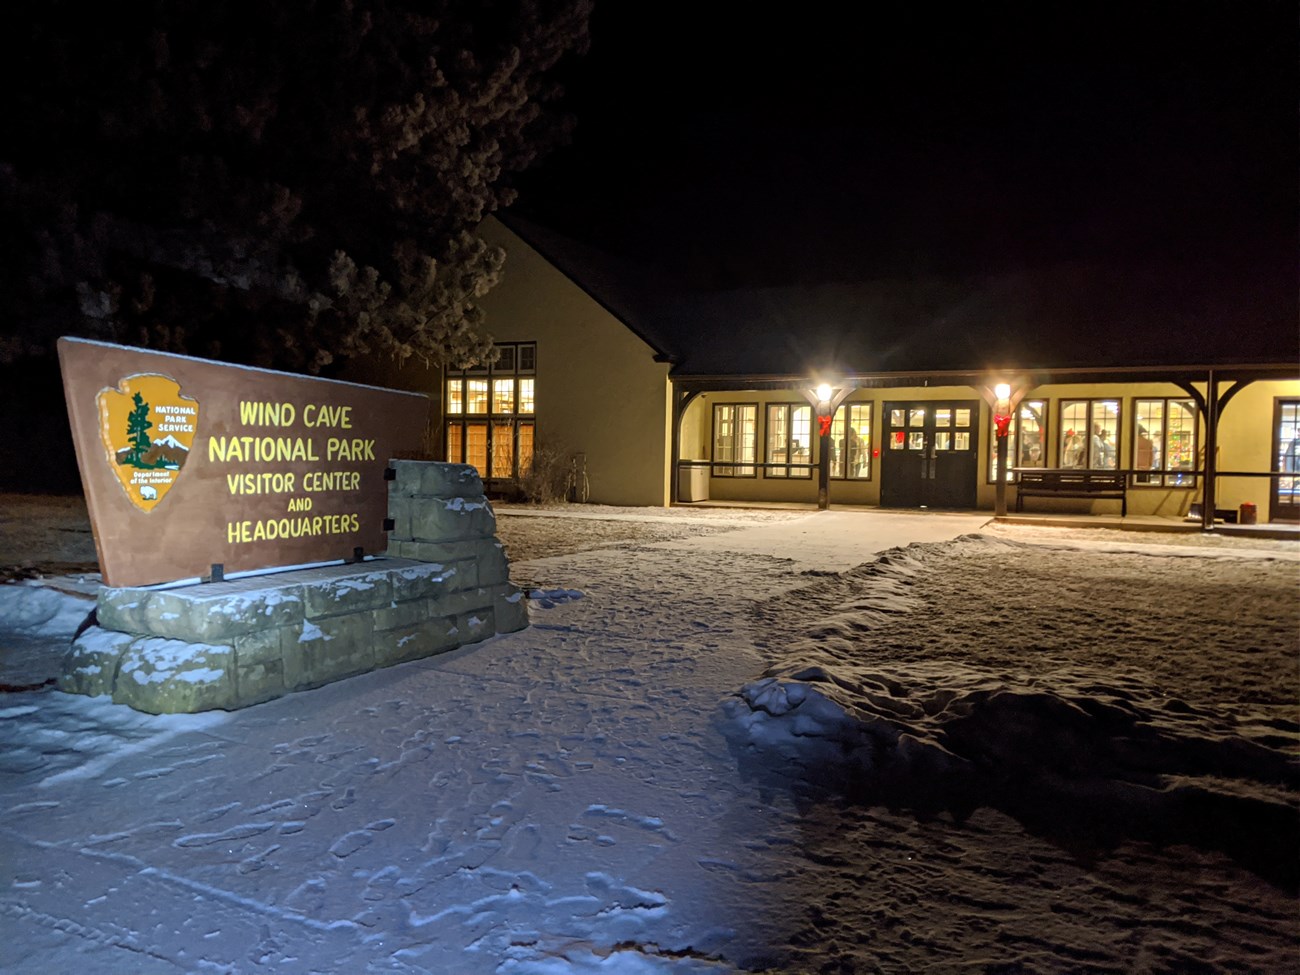 Nighttime outside the visitor center with snow covering the ground.